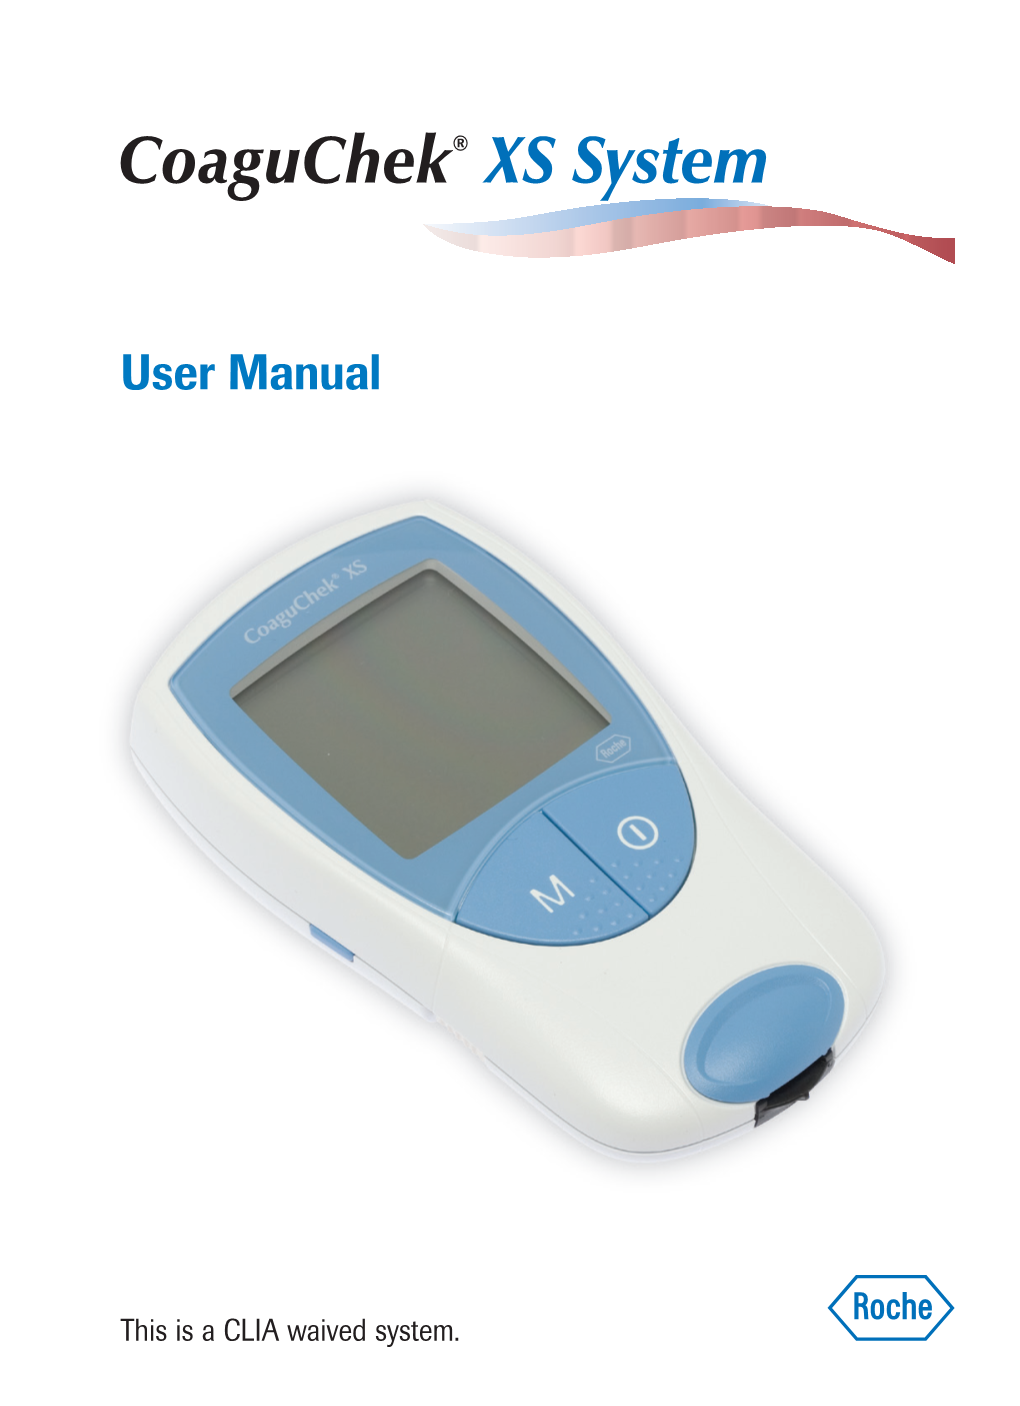 Coaguchek XS System User Manual Is a Comprehensive Guide to the Meter and Test Strips